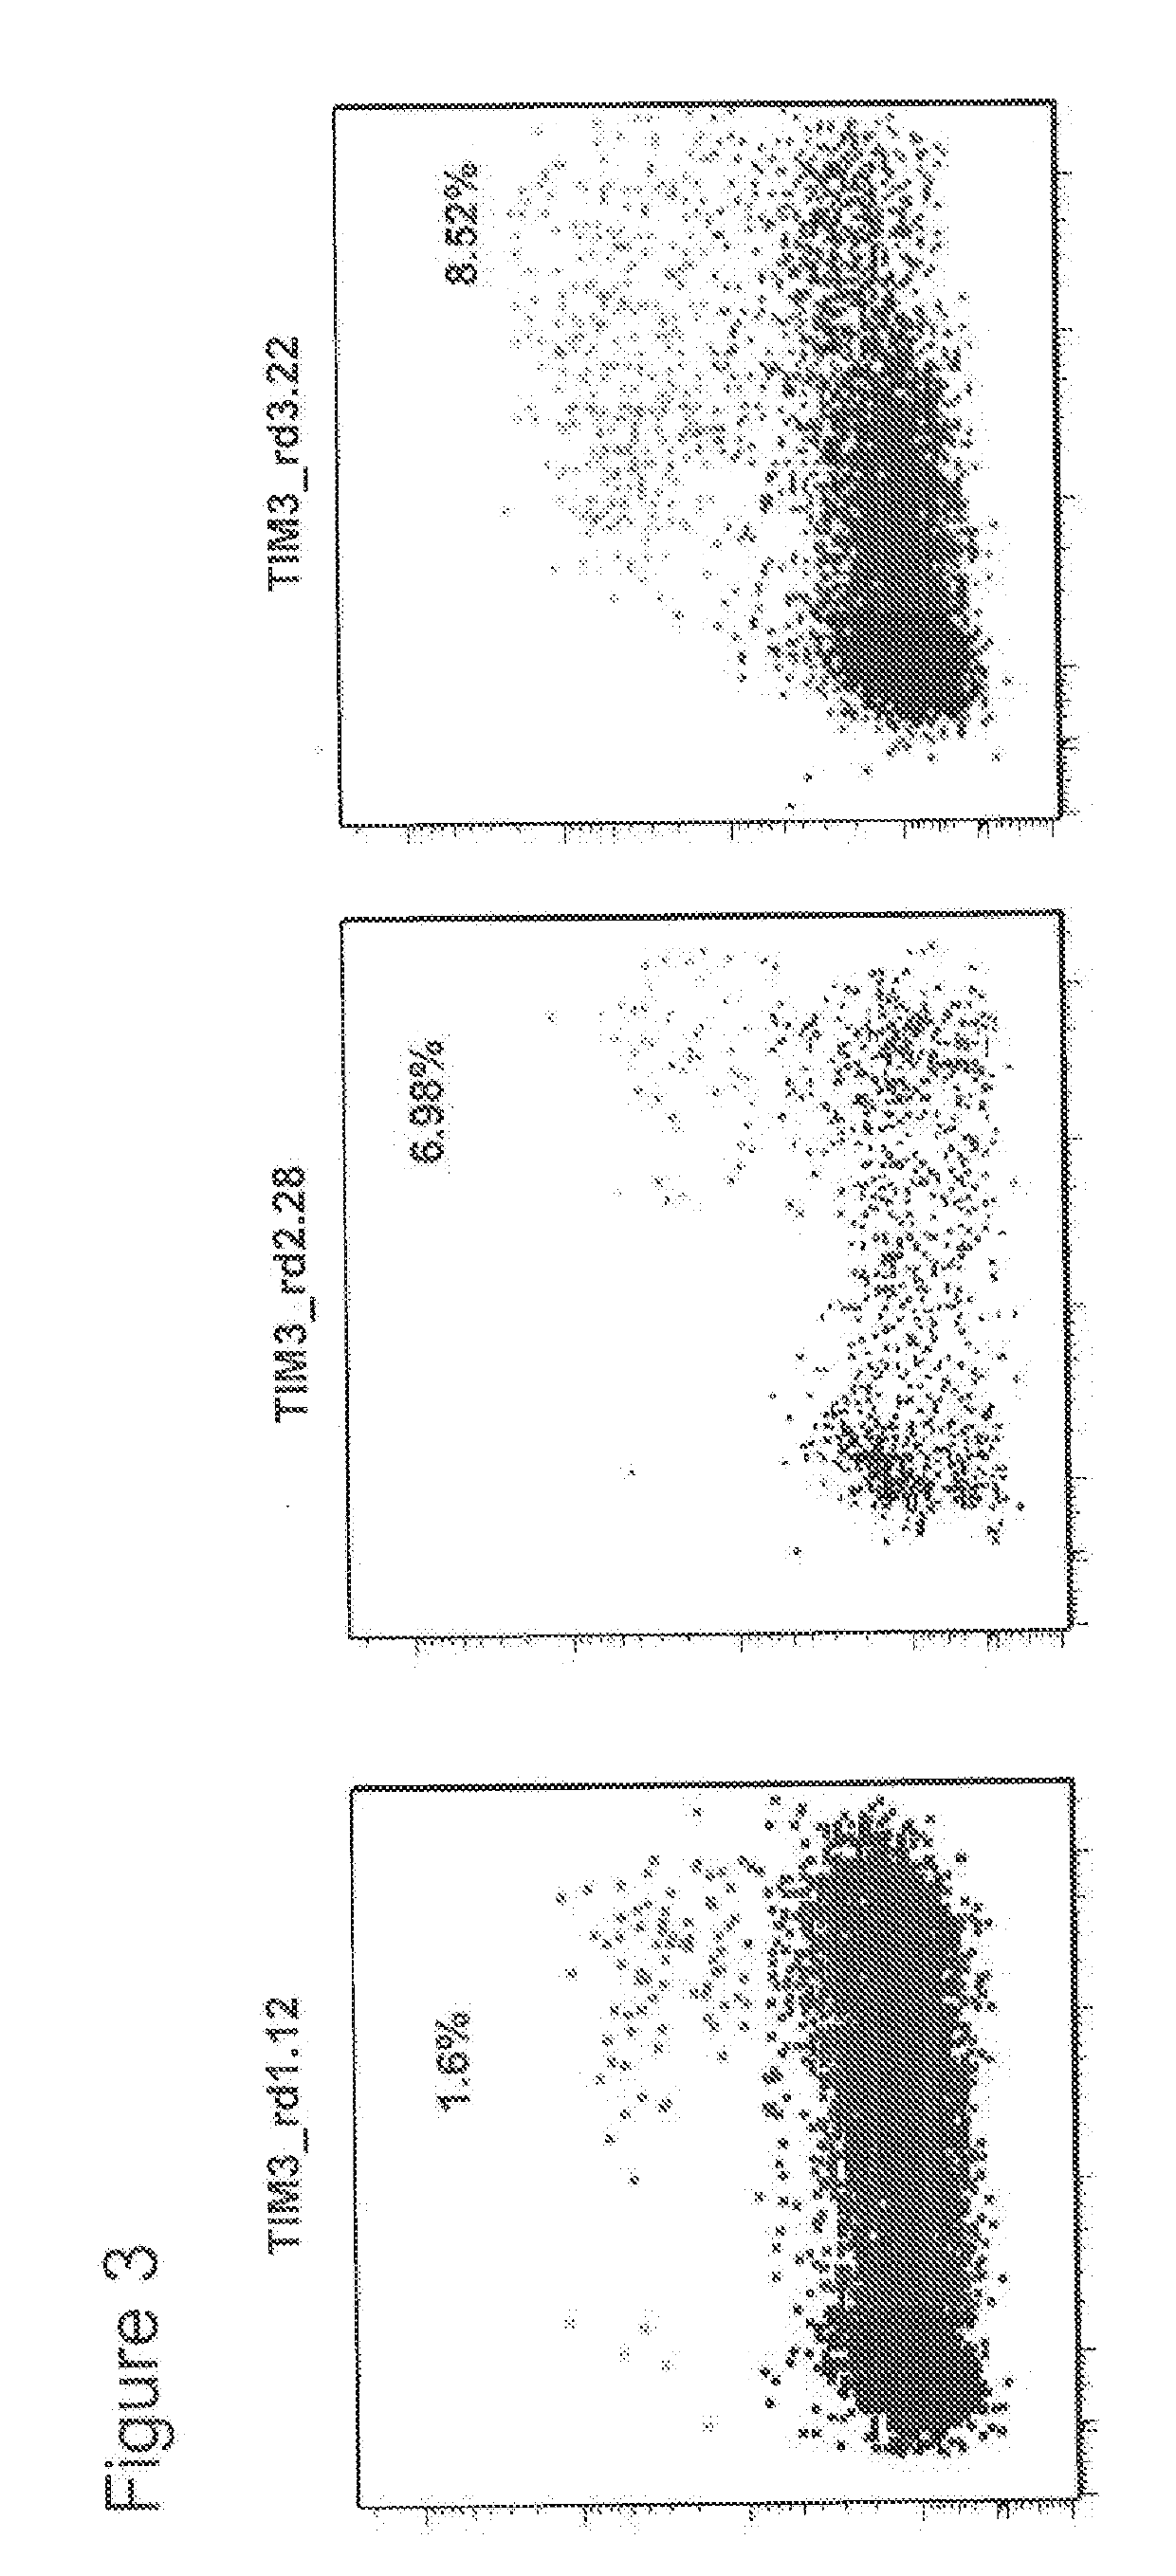 Tim3 homing endonuclease variants, compositions, and methods of use